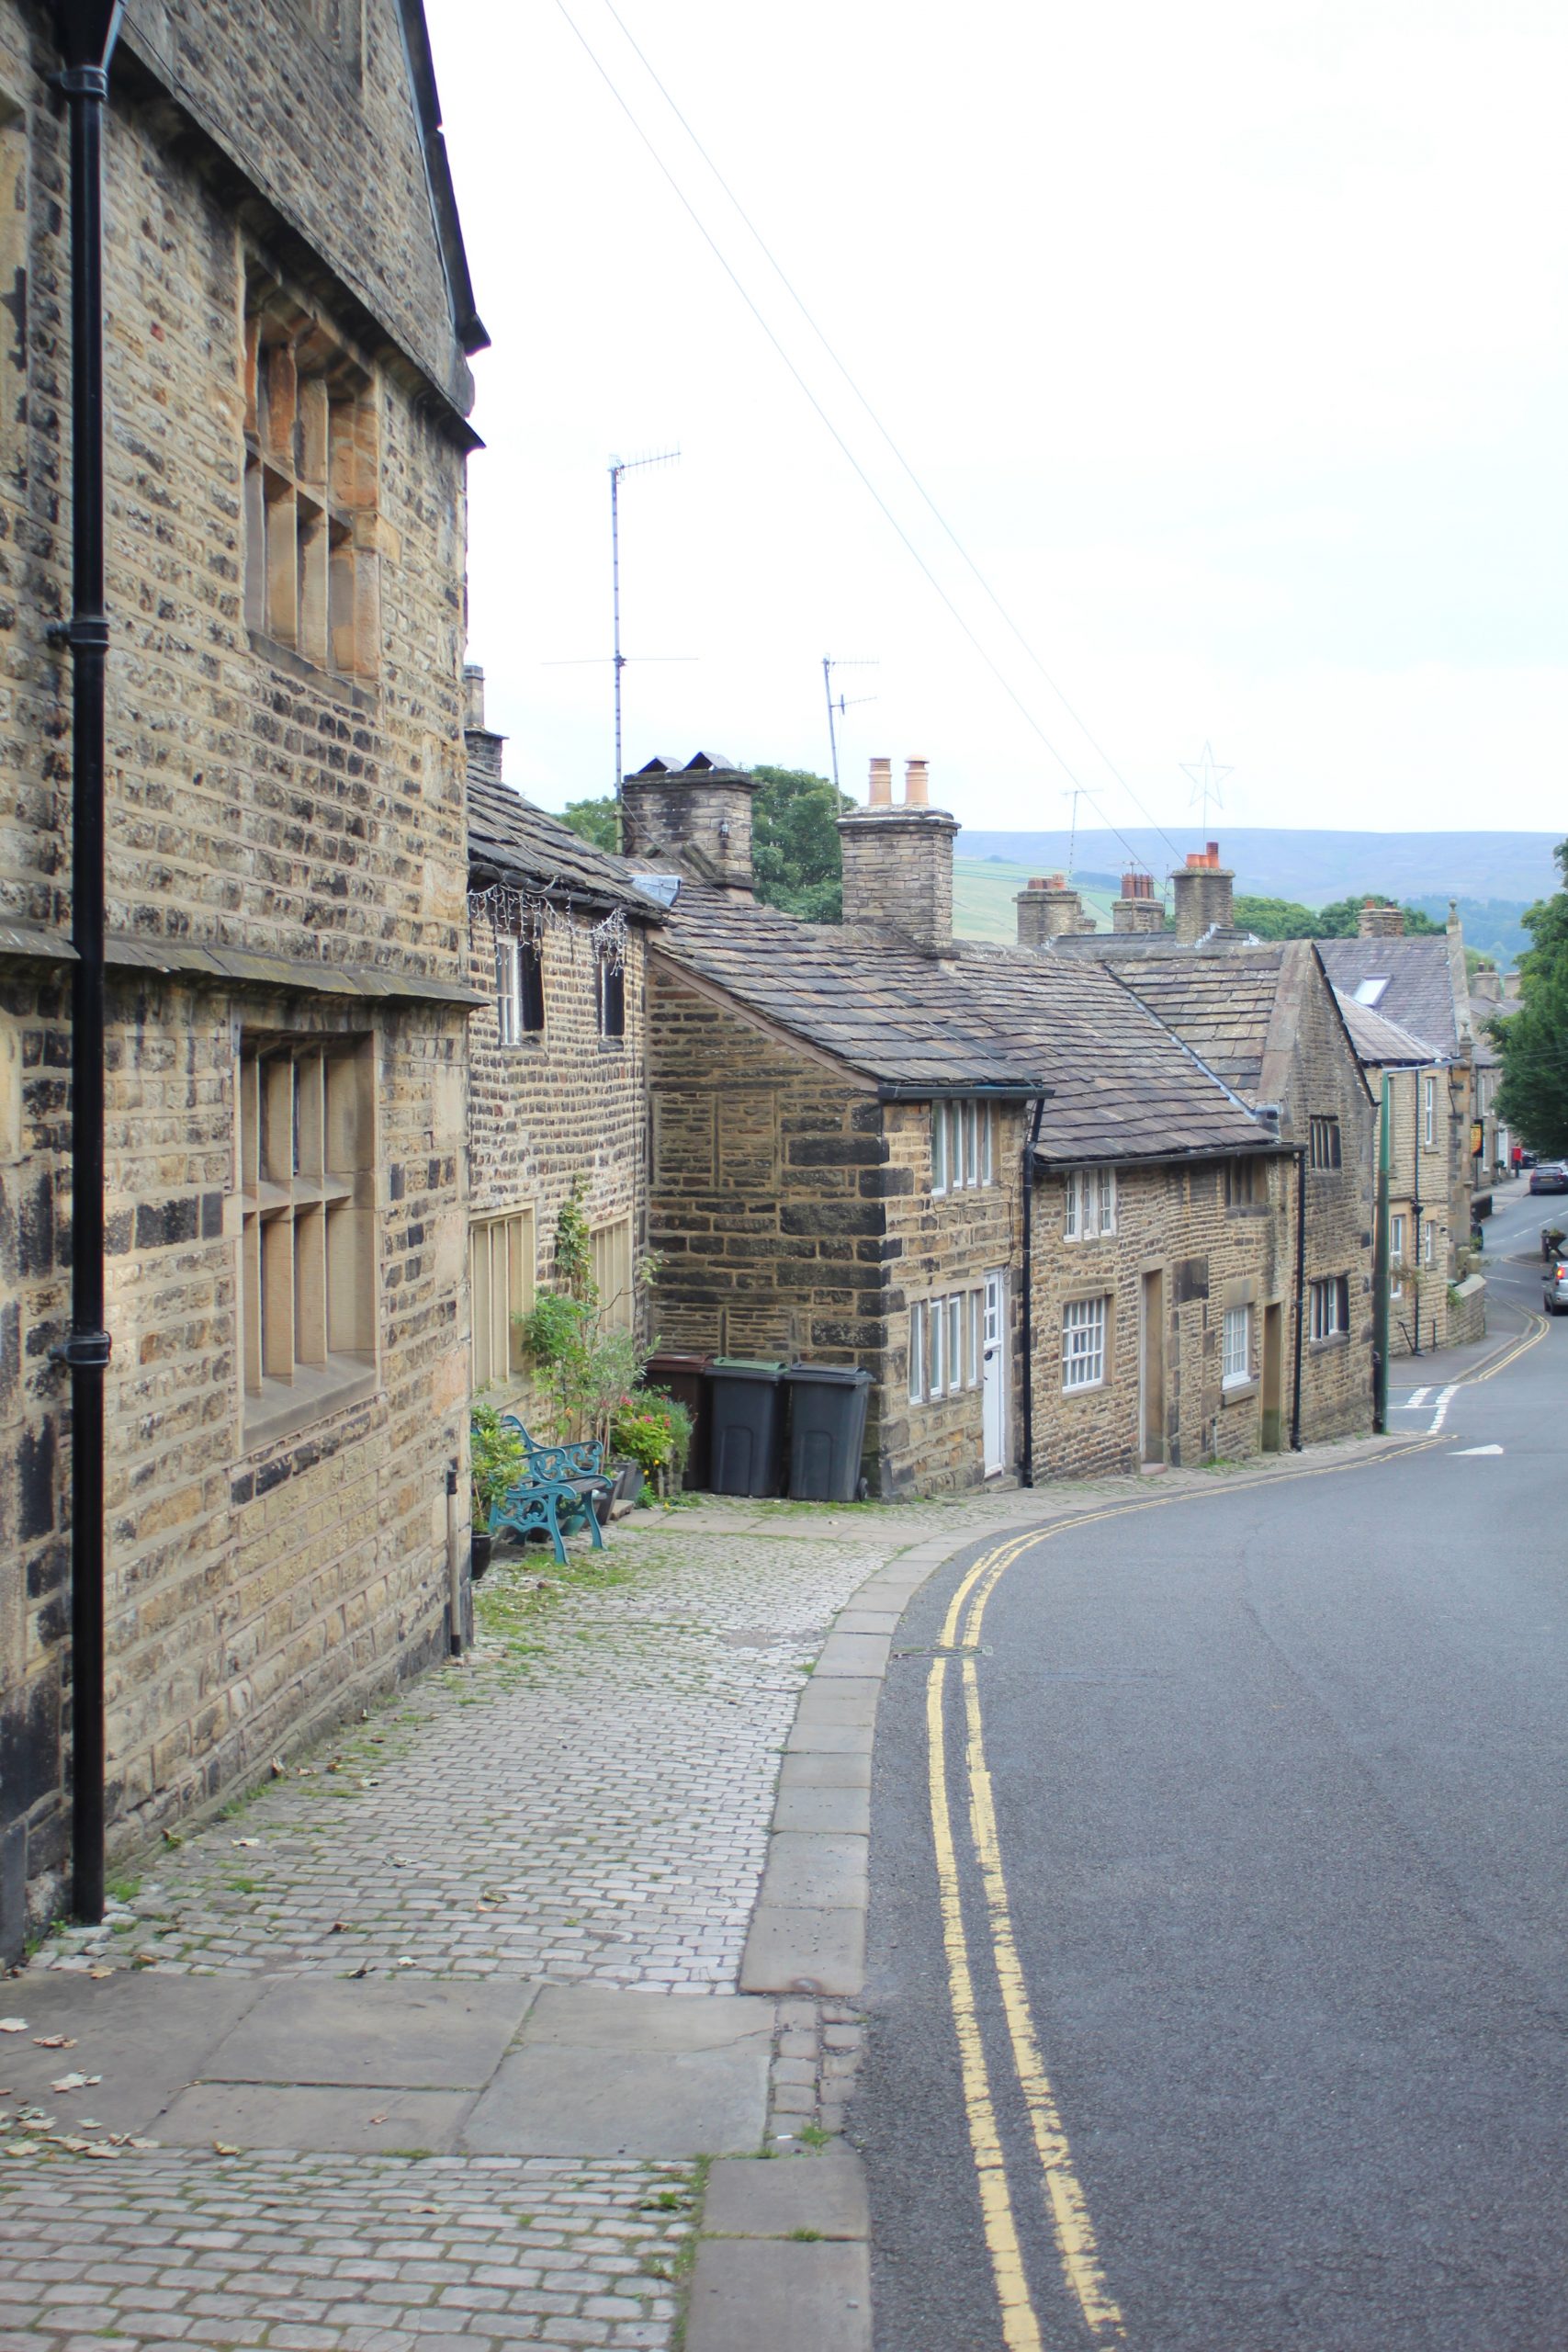 Cottages in Old Glossop - The Wandering Wildflower blog